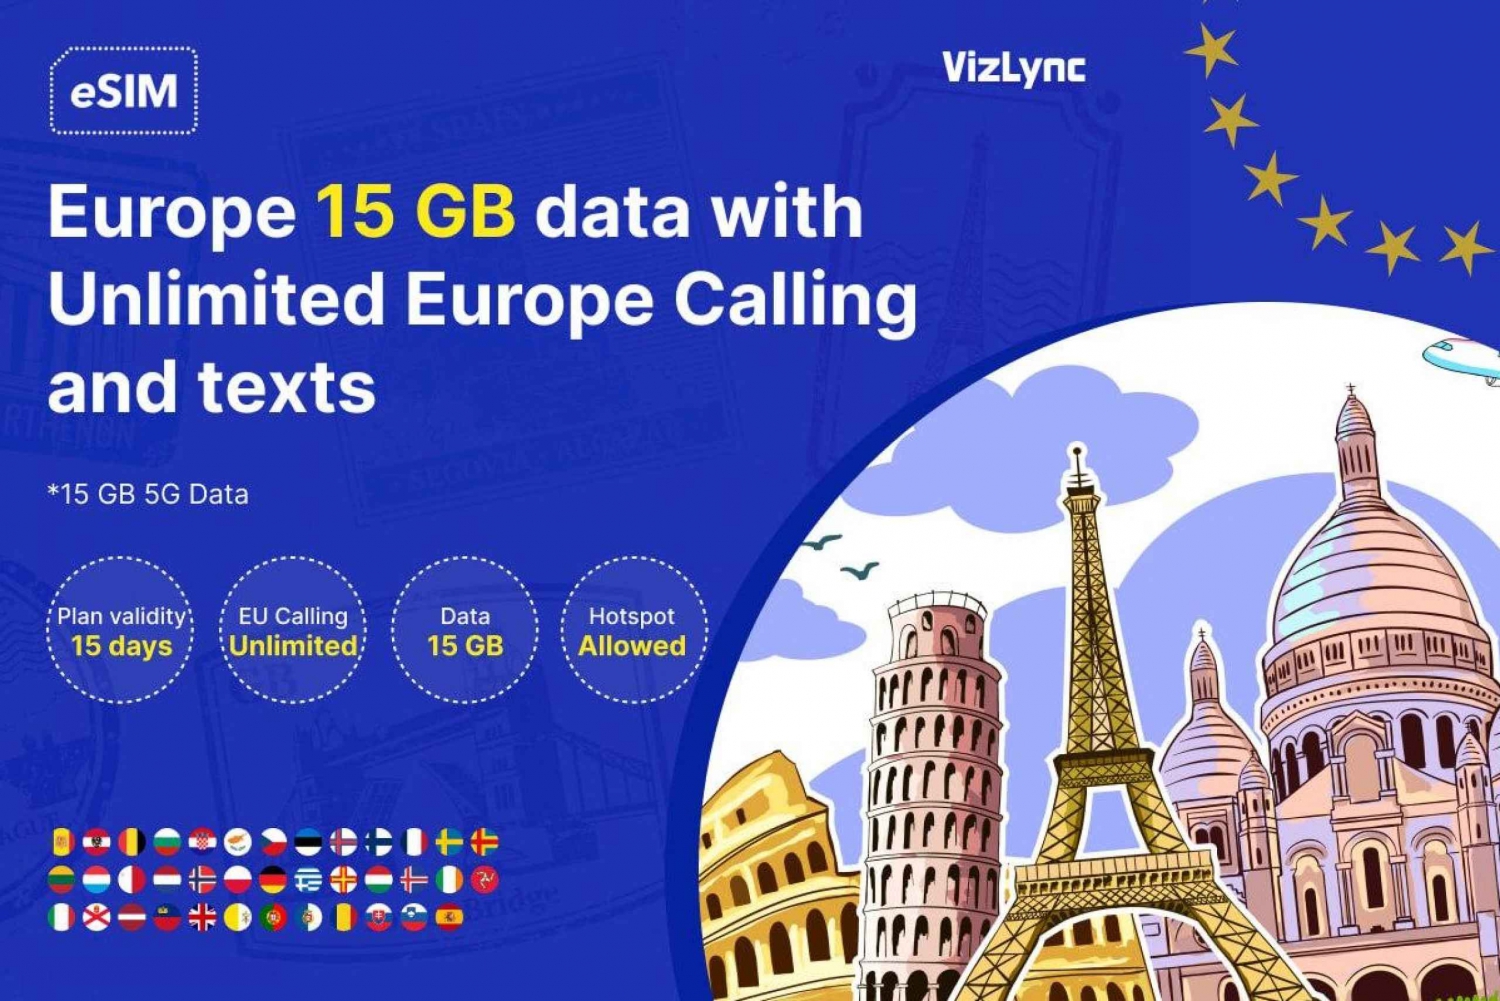 Europe Travel 15 GB data with Unlimited Calling